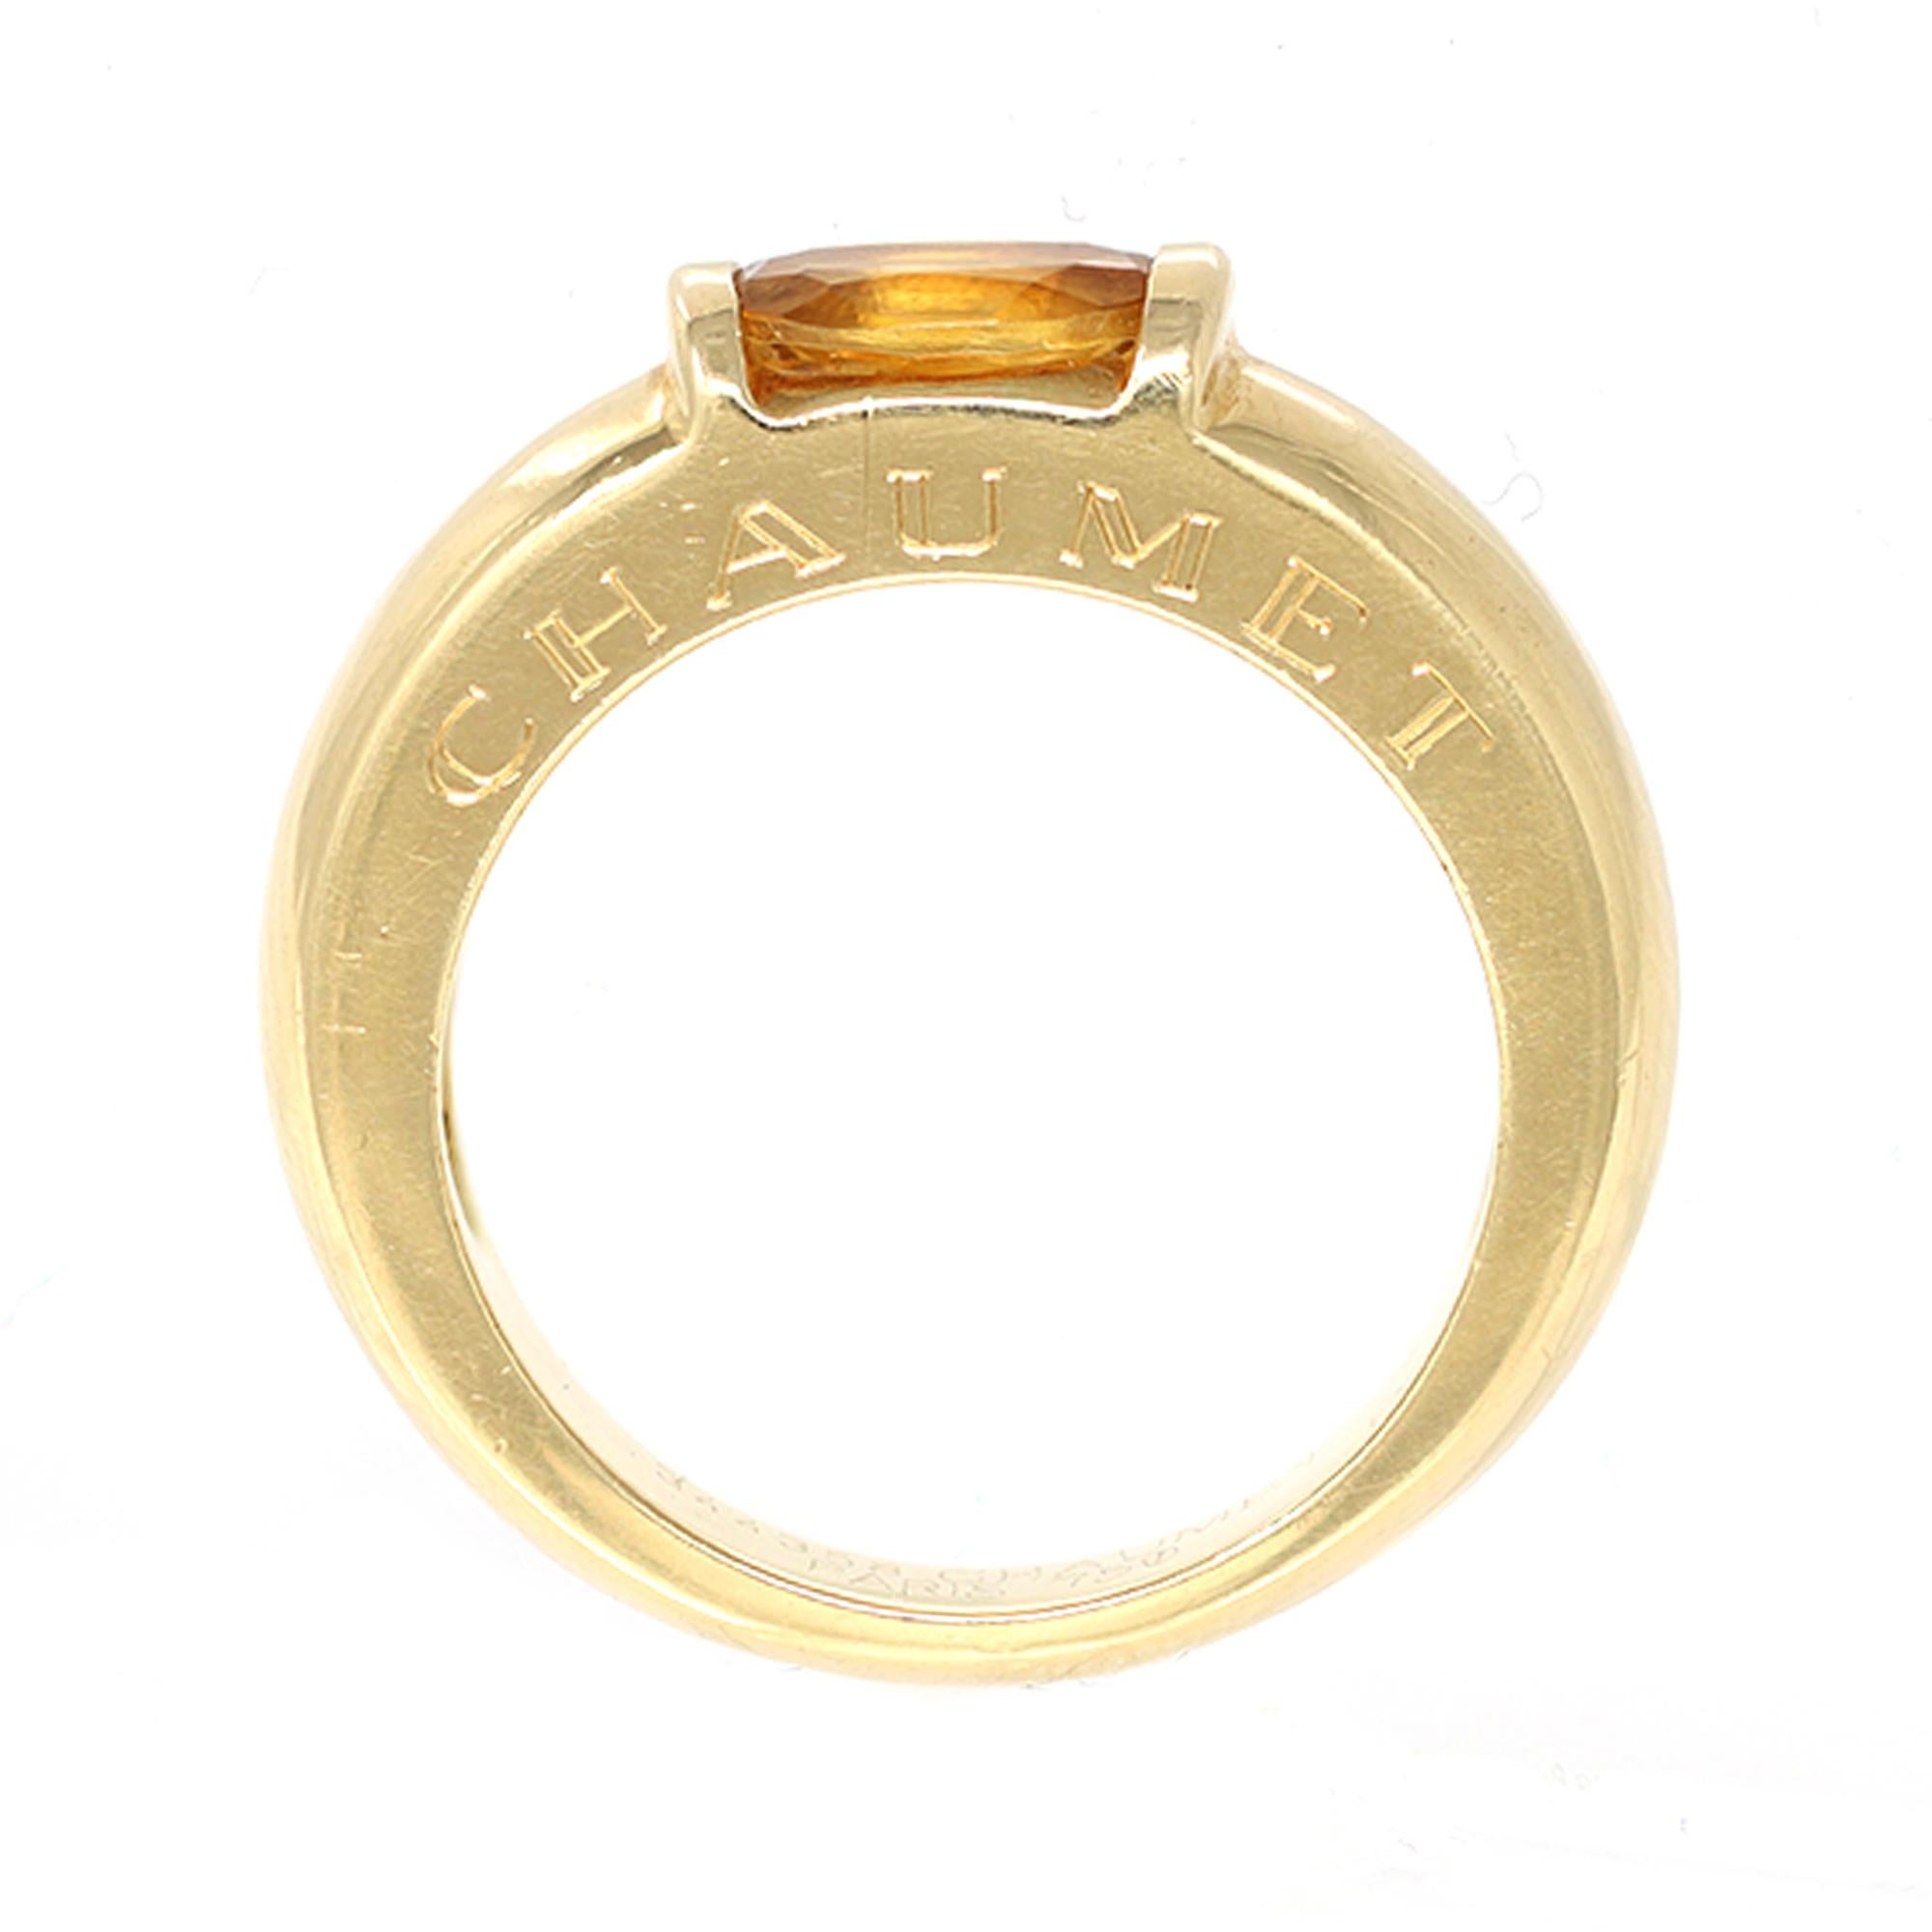 The band ring by the French house of jewelry Chaumet Paris features an oval-shaped citrine set in 18-karat yellow gold. The citrine is tension set and has Chaumet engraved on the side of the shank. The gross weight is 9.8 grams. It fits a size 7 and